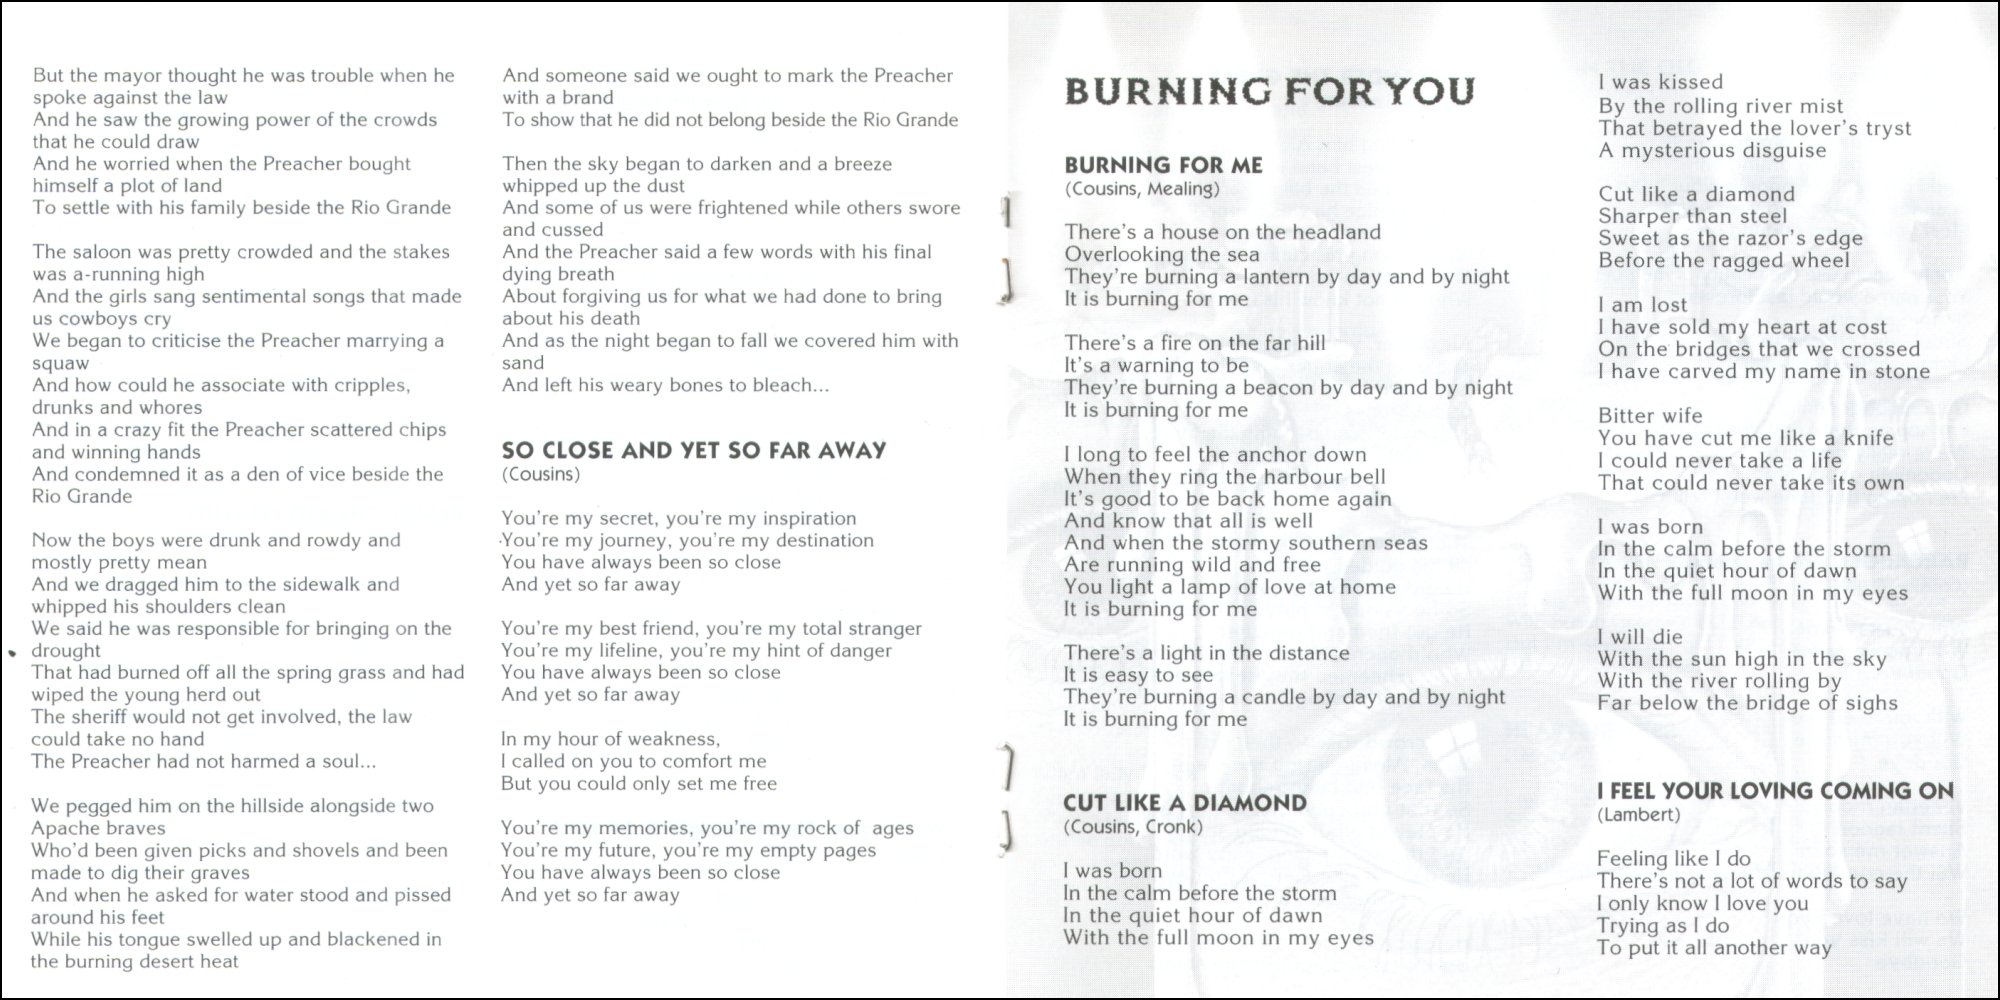 Deep Cuts/Burning For You CD booklet